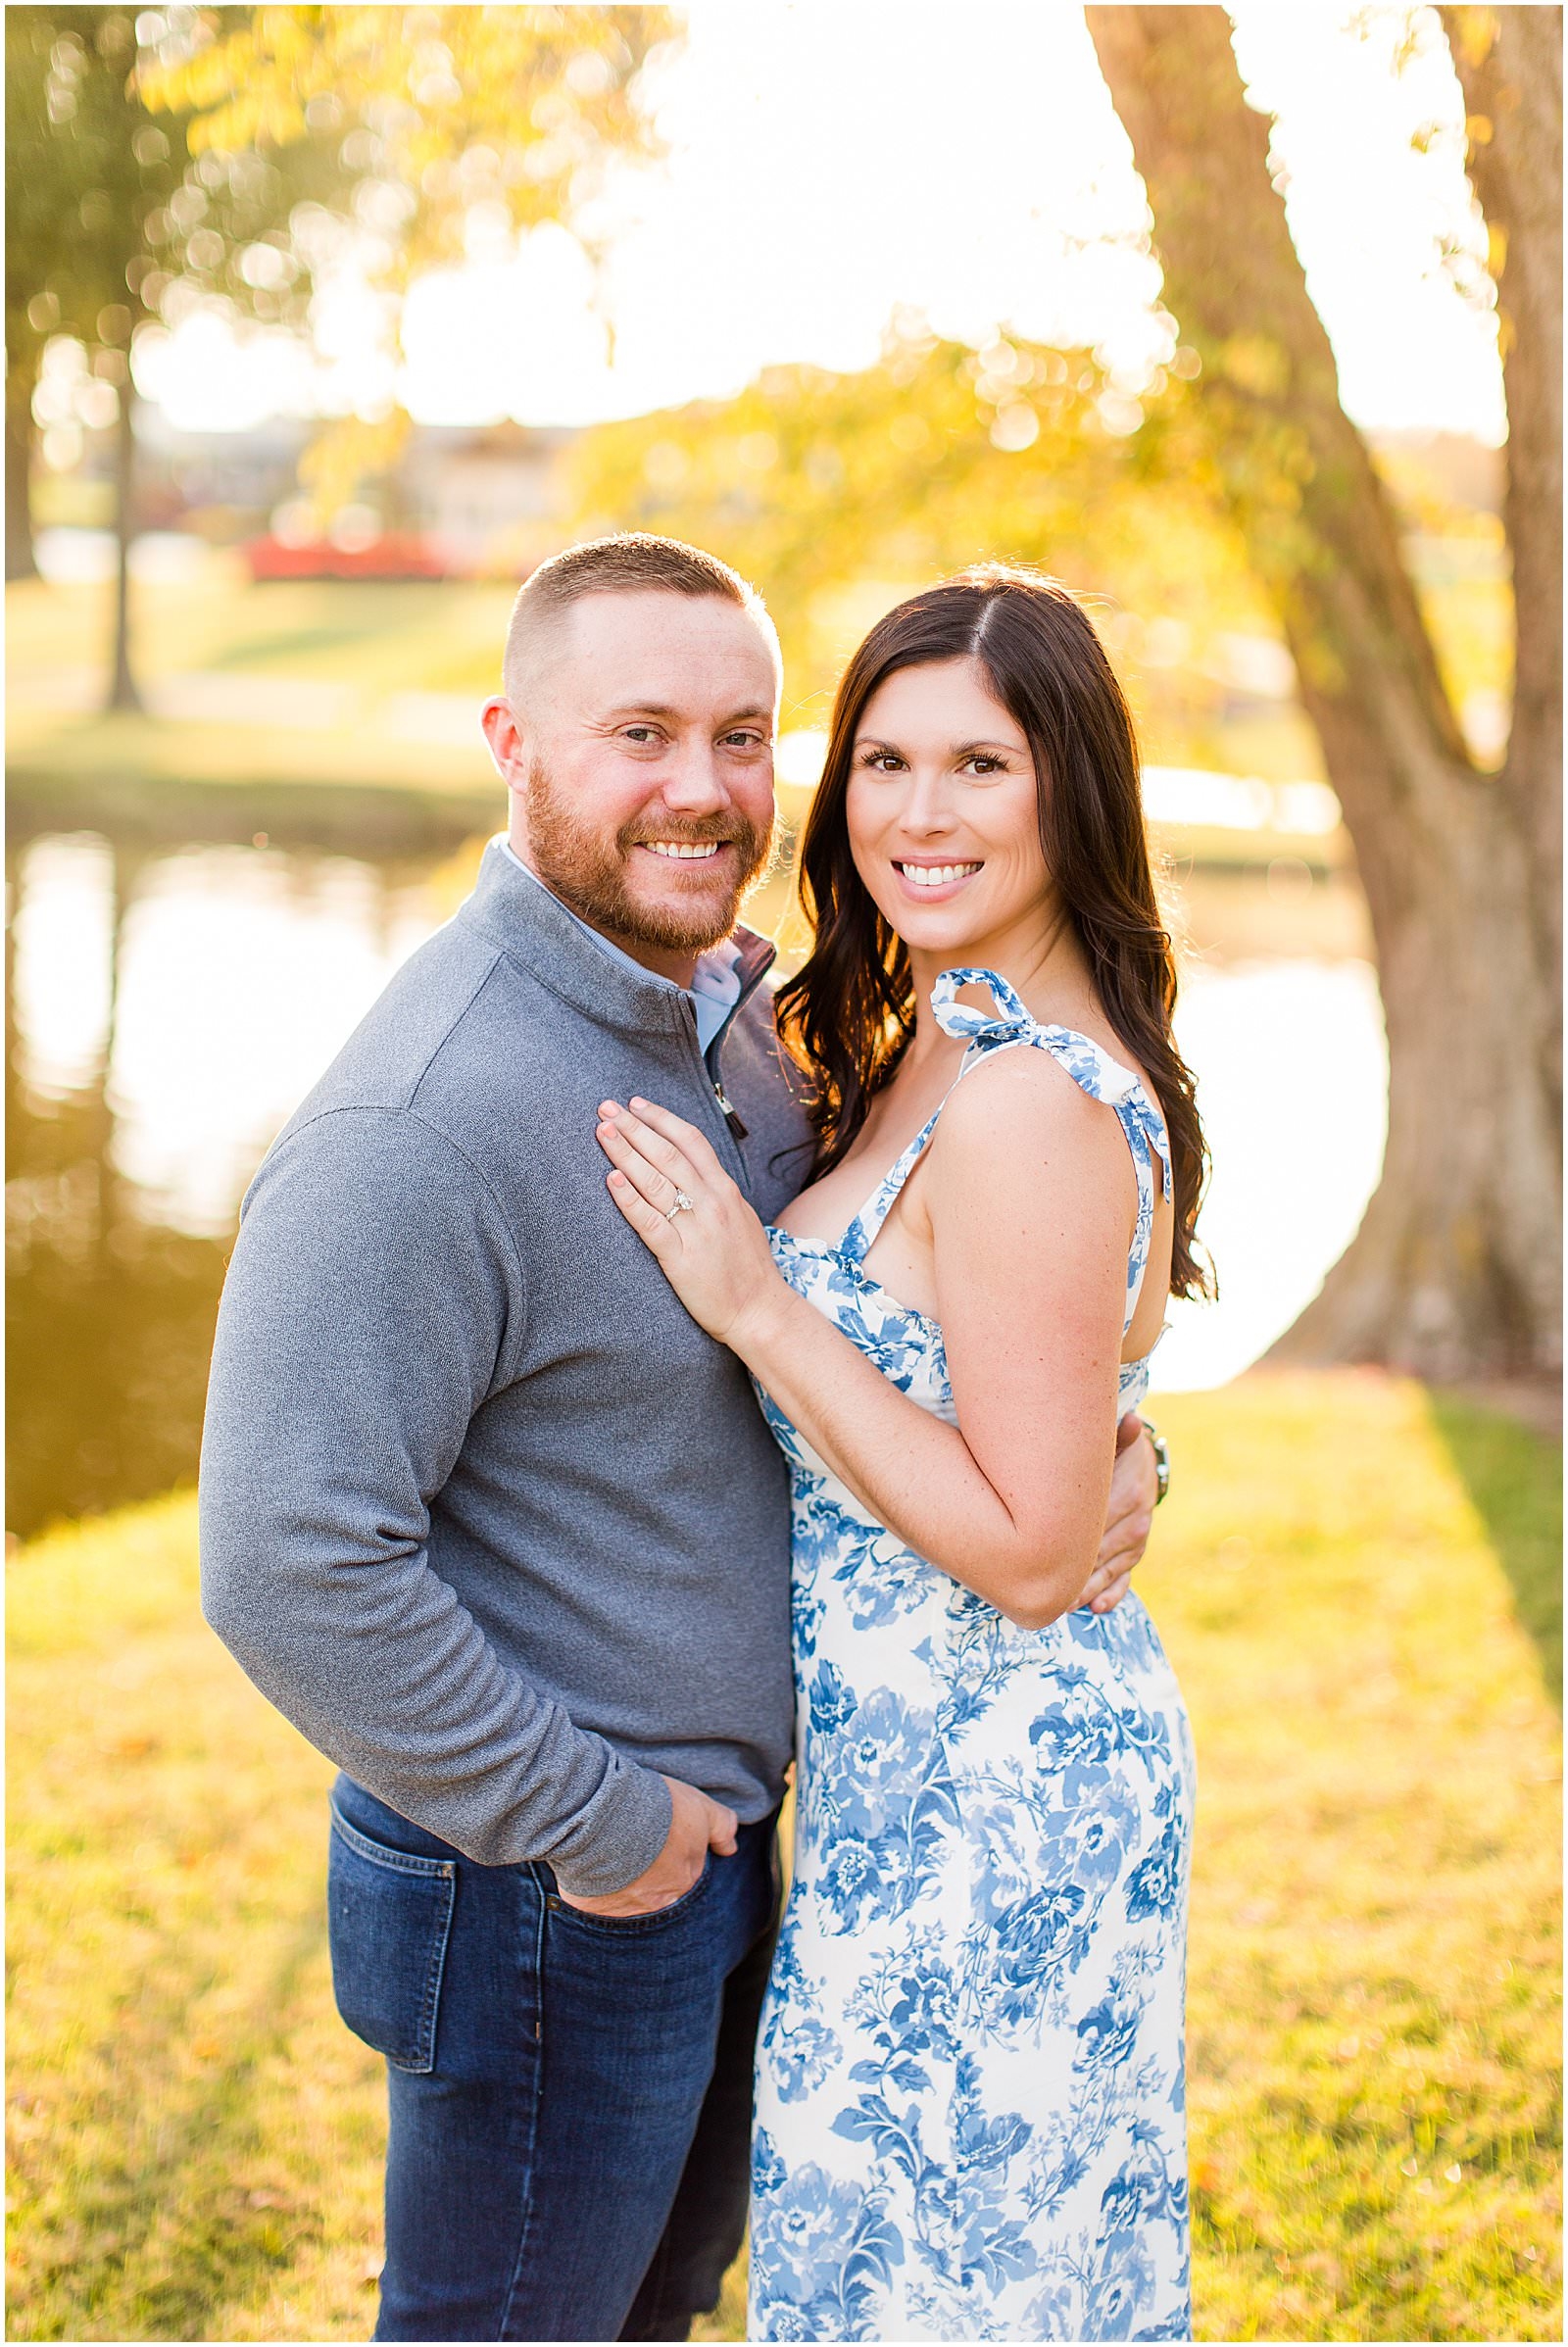 A Rolling Hills Country Club Engagement Session | Meagan and Kyle | Bret and Brandie Photography 0034.jpg